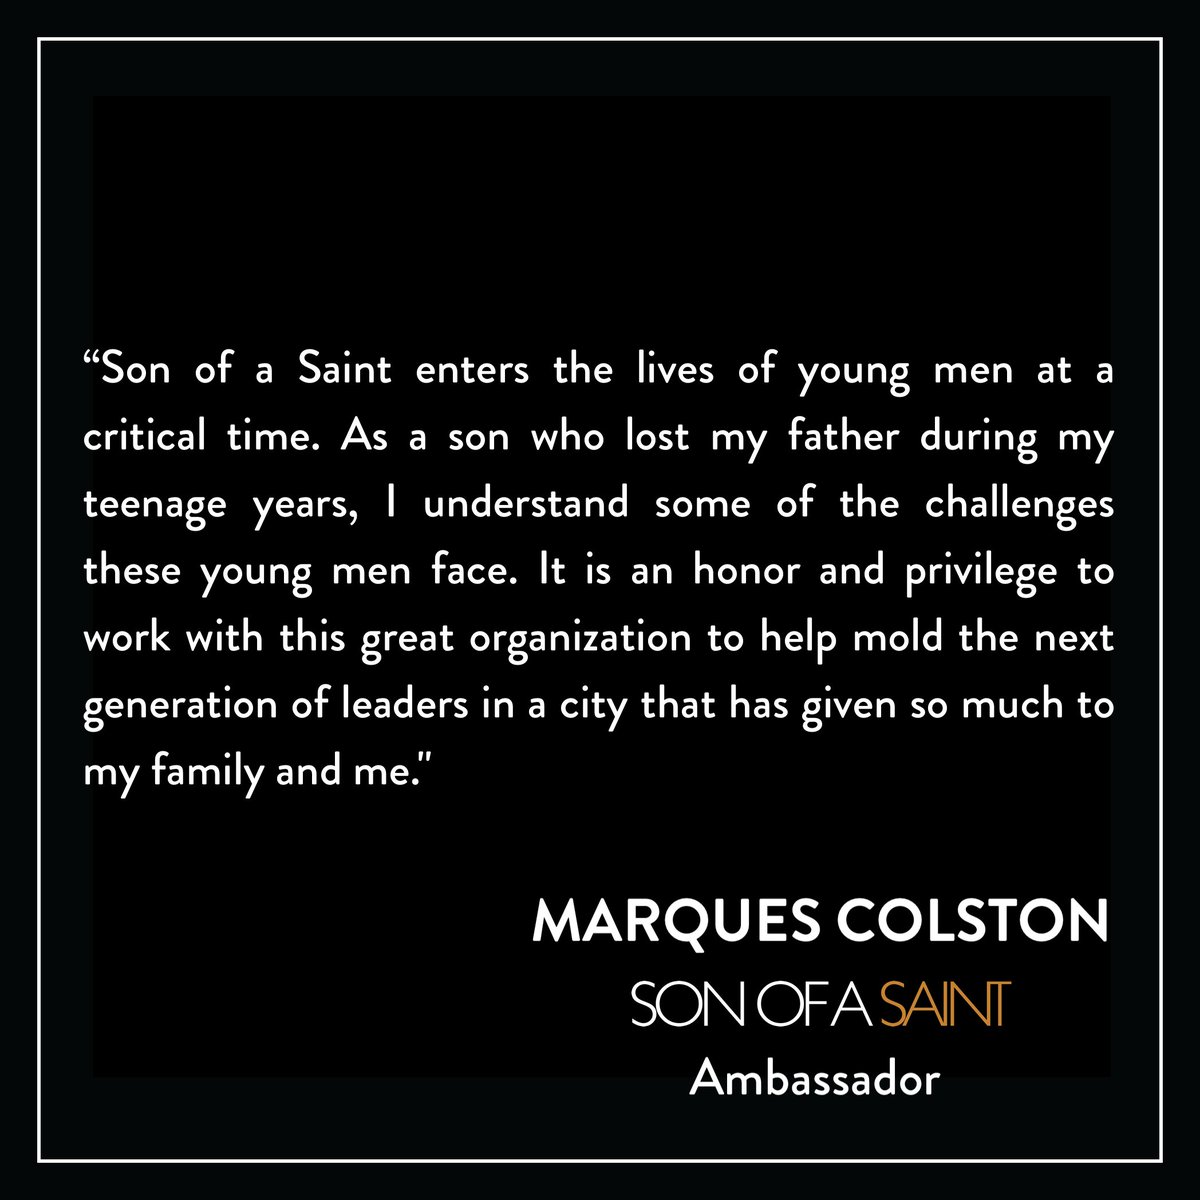 Today, we officially welcome our newest Son of a Saint Ambassador @MarquesColston! Marques is a great ally and shining example to show our young men how to become their best selves. 🤝🏆